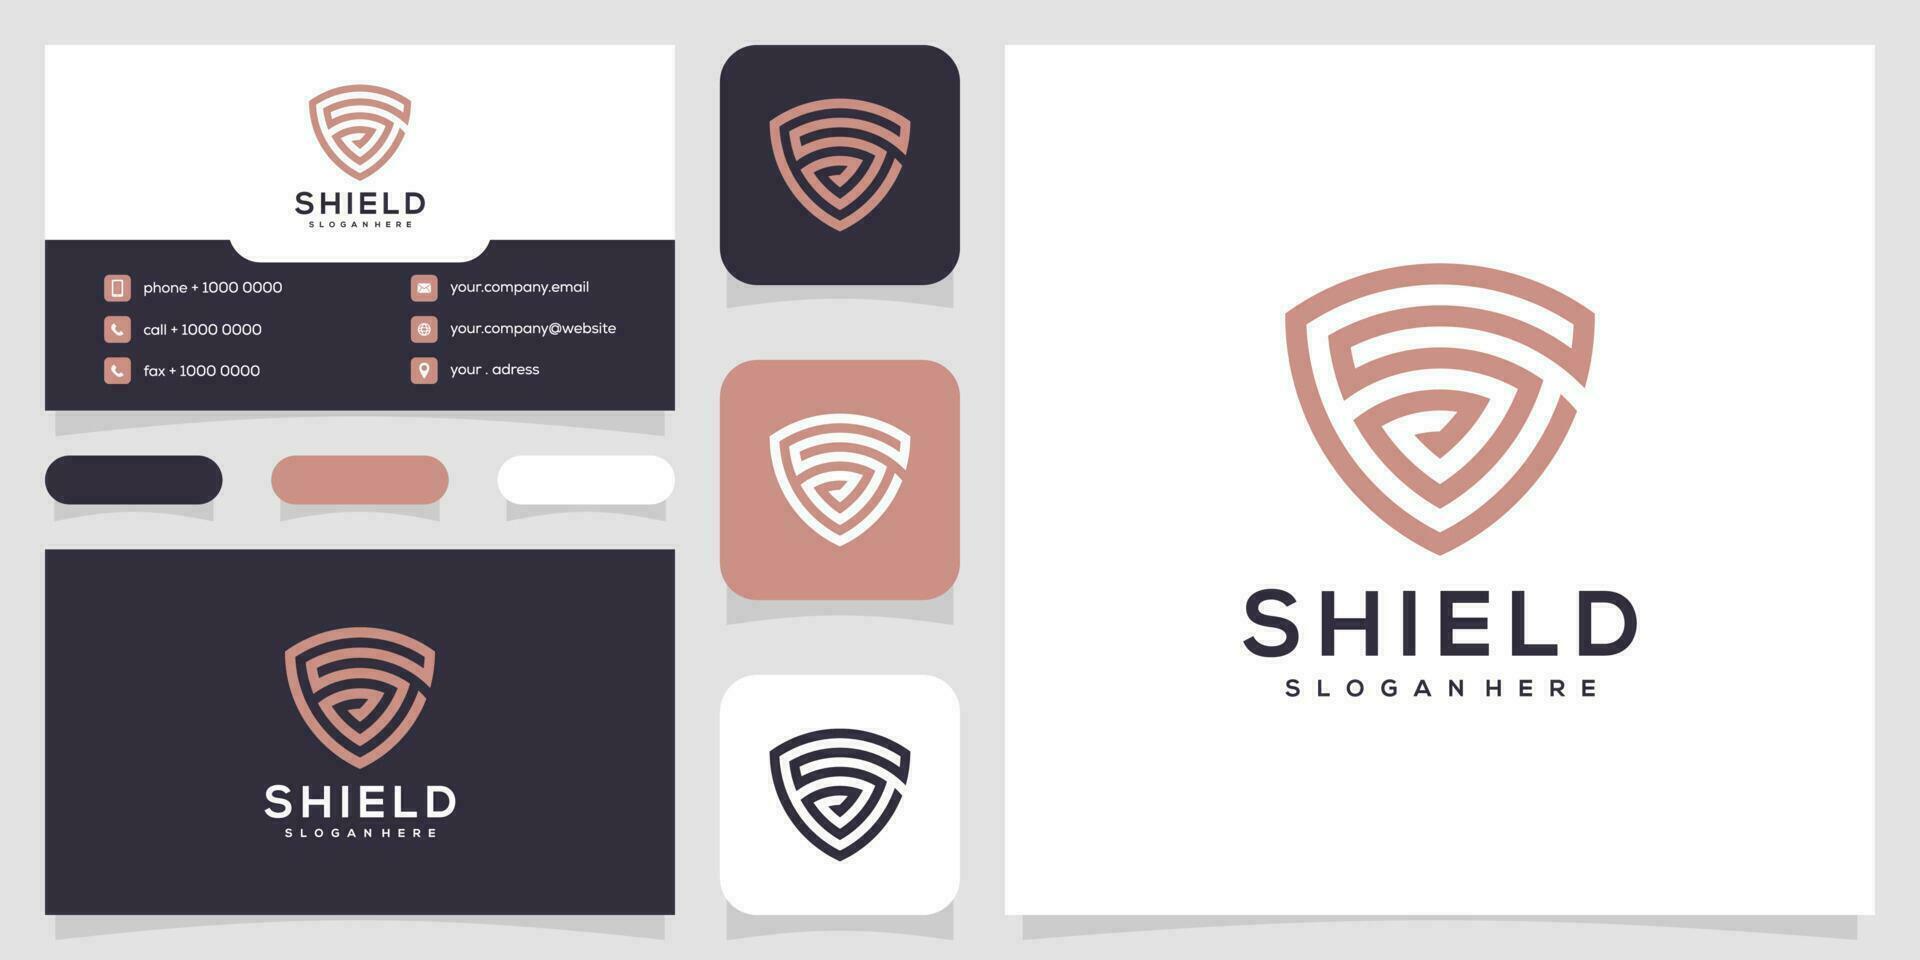 shield logo and business card template vector